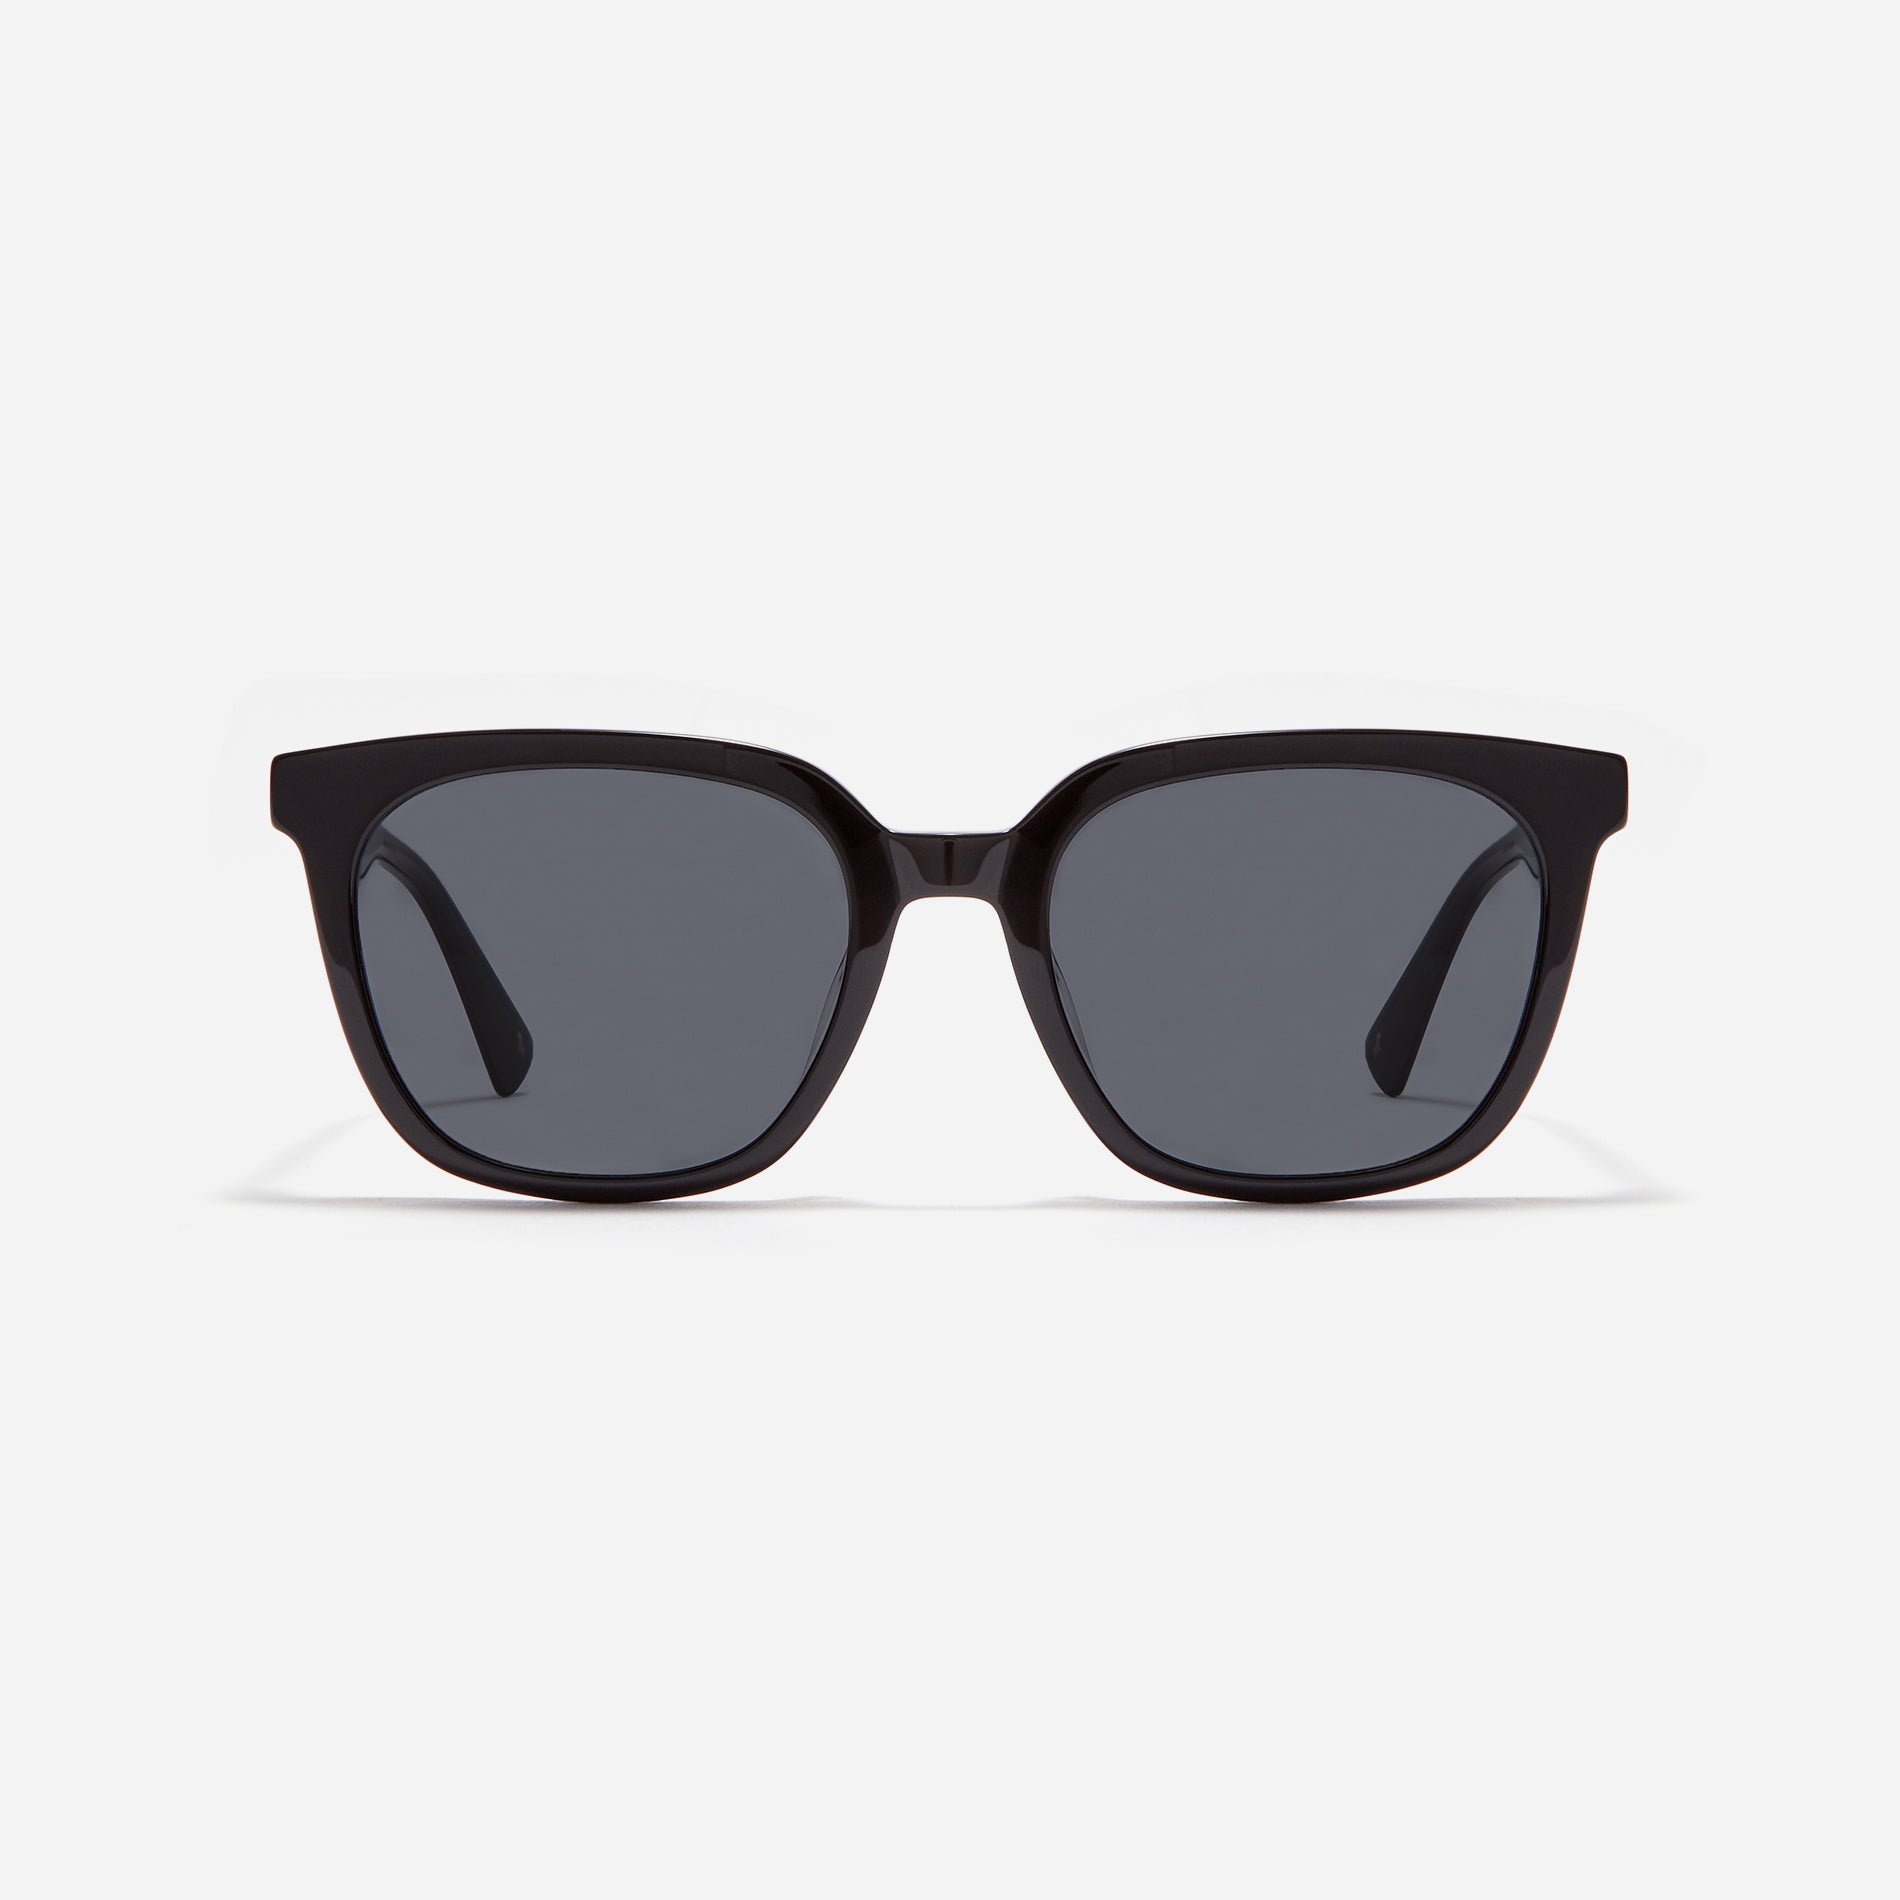 Square-shaped unisex sunglasses featuring a gentle, curved square shape that naturally complements the face. 